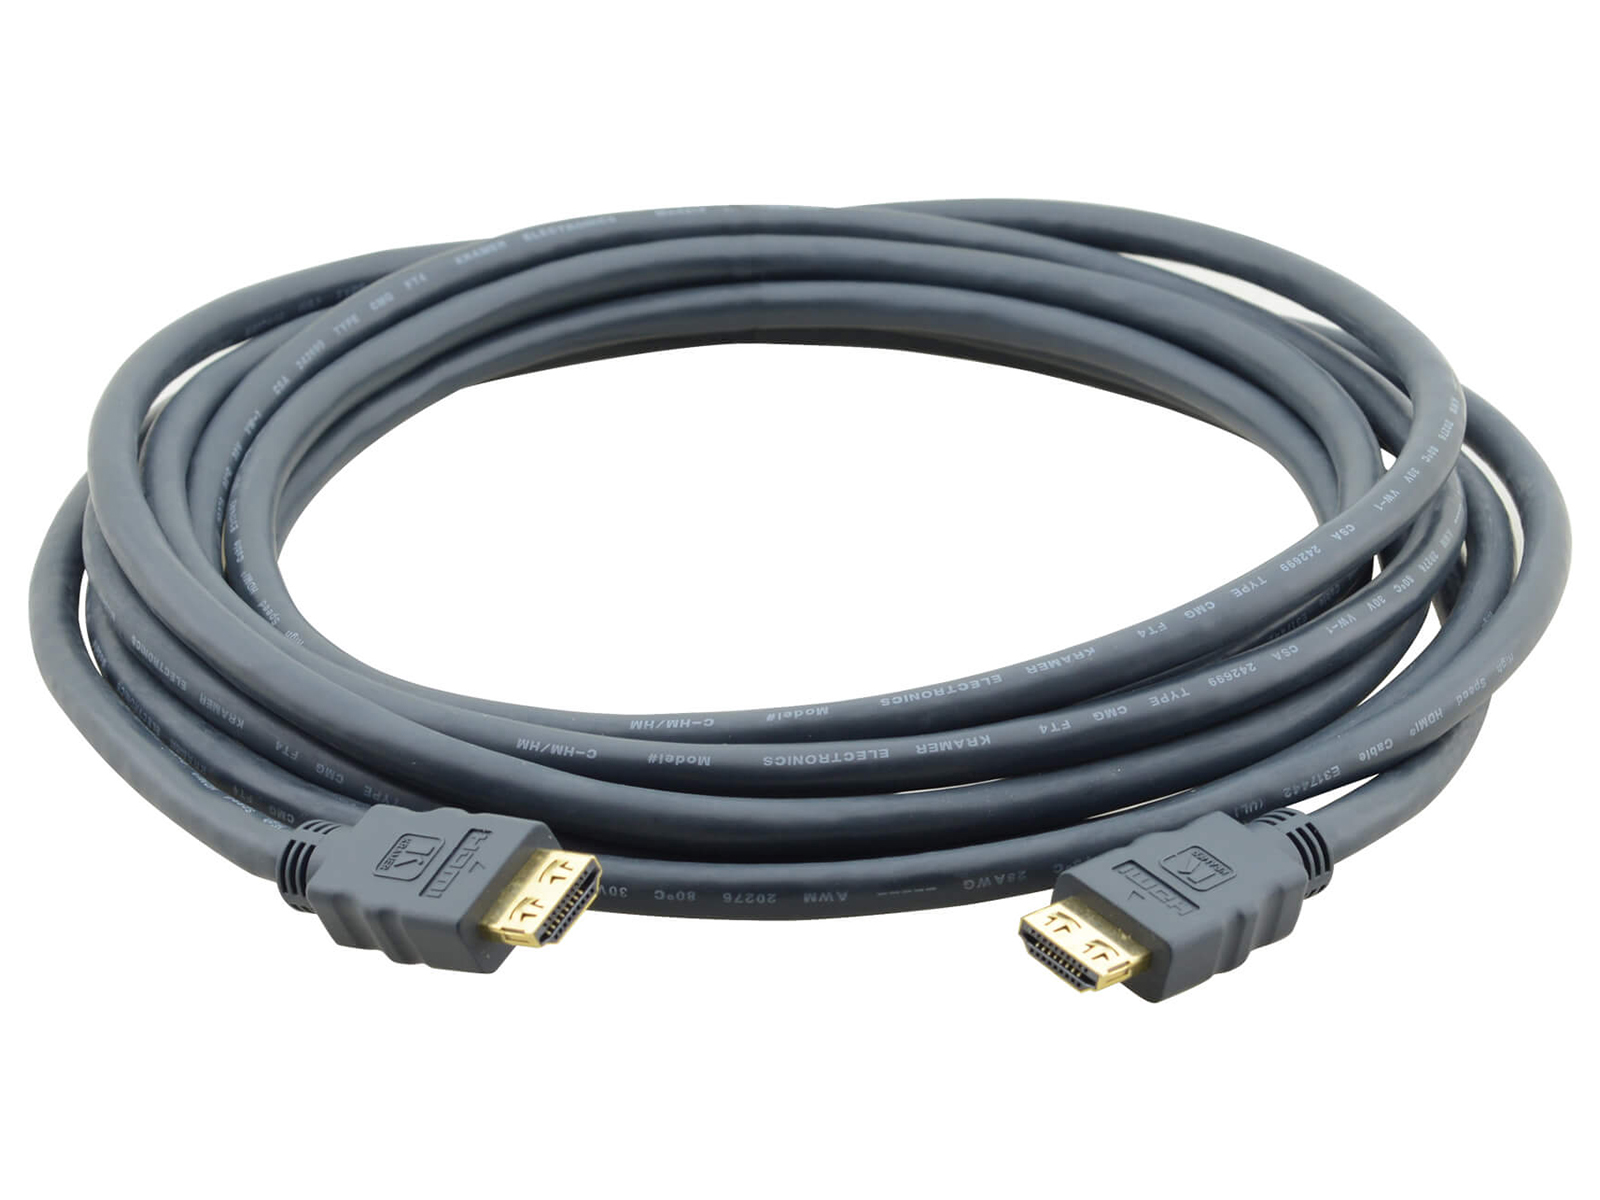 Kramer C-HM/HM/ETH-50 HDMI (M) to HDMI (M) Cable with Ethernet - 50ft